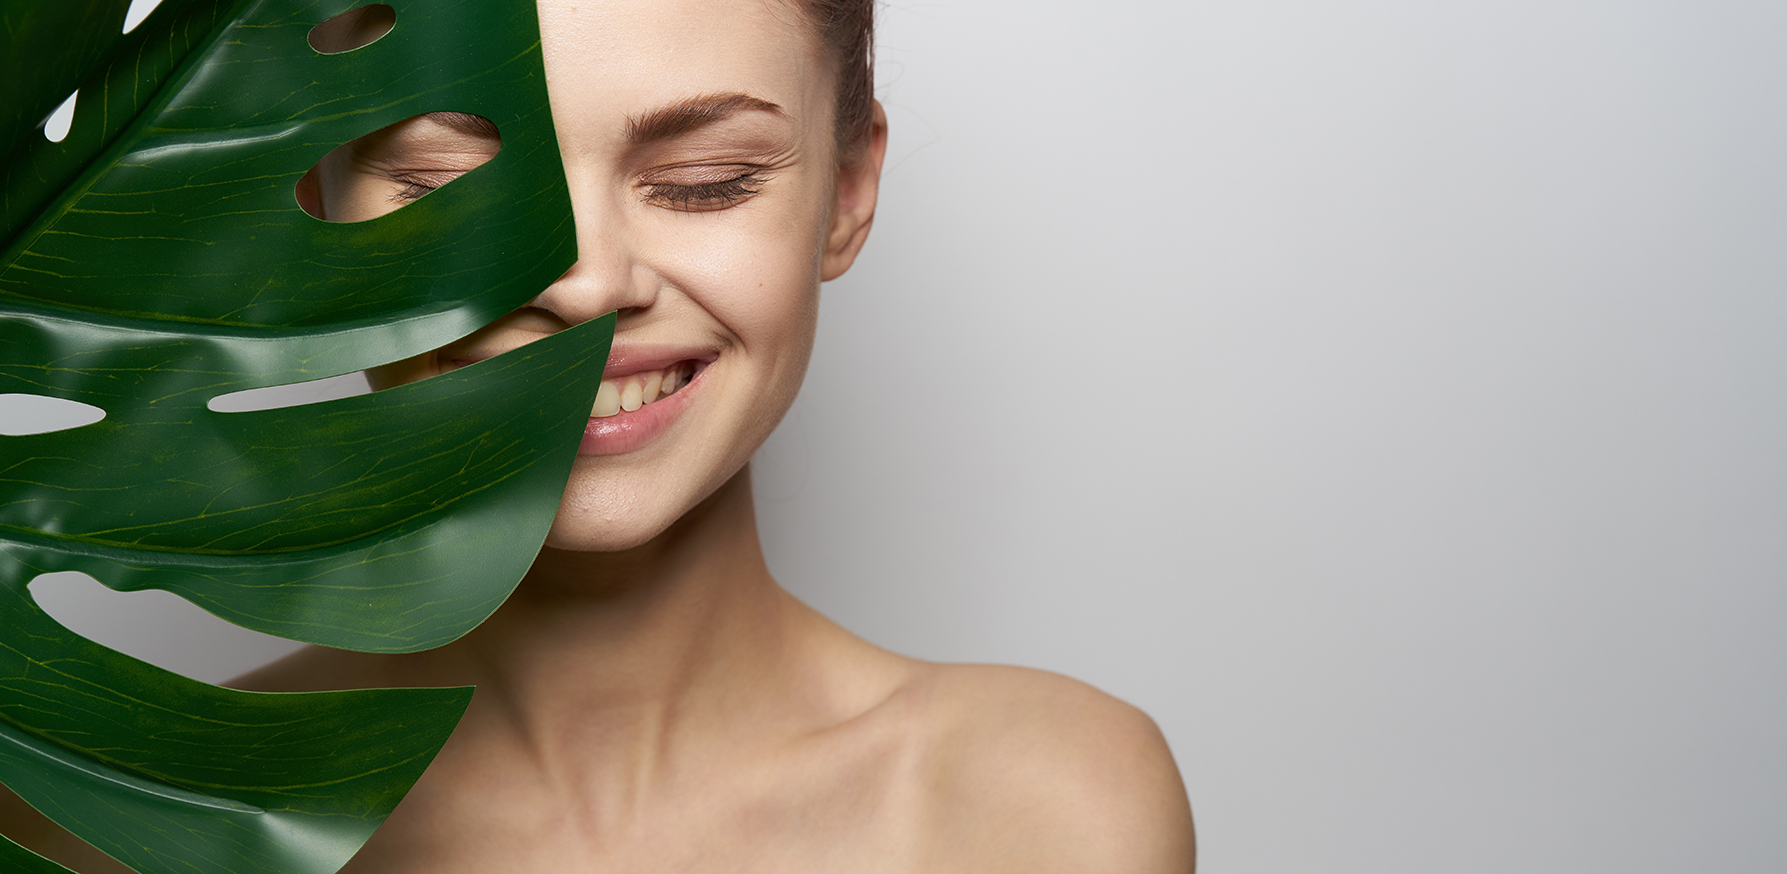 make-your-own-at-home-beauty-masks-smiling-woman-with-great-skin-holding-a-leaf